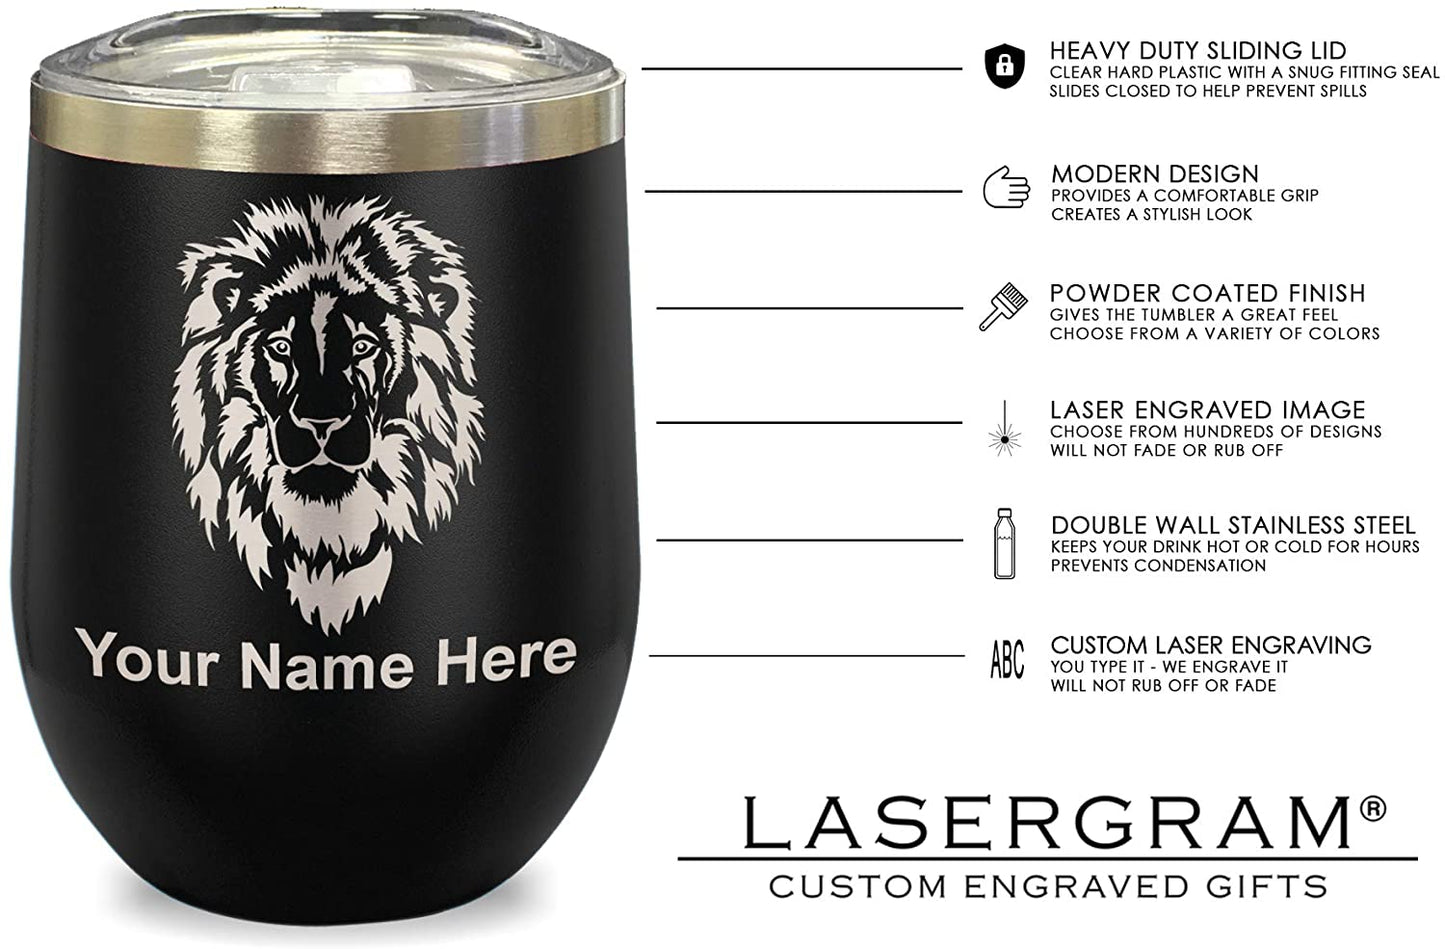 LaserGram Double Wall Stainless Steel Wine Glass, Zodiac Sign Libra, Personalized Engraving Included